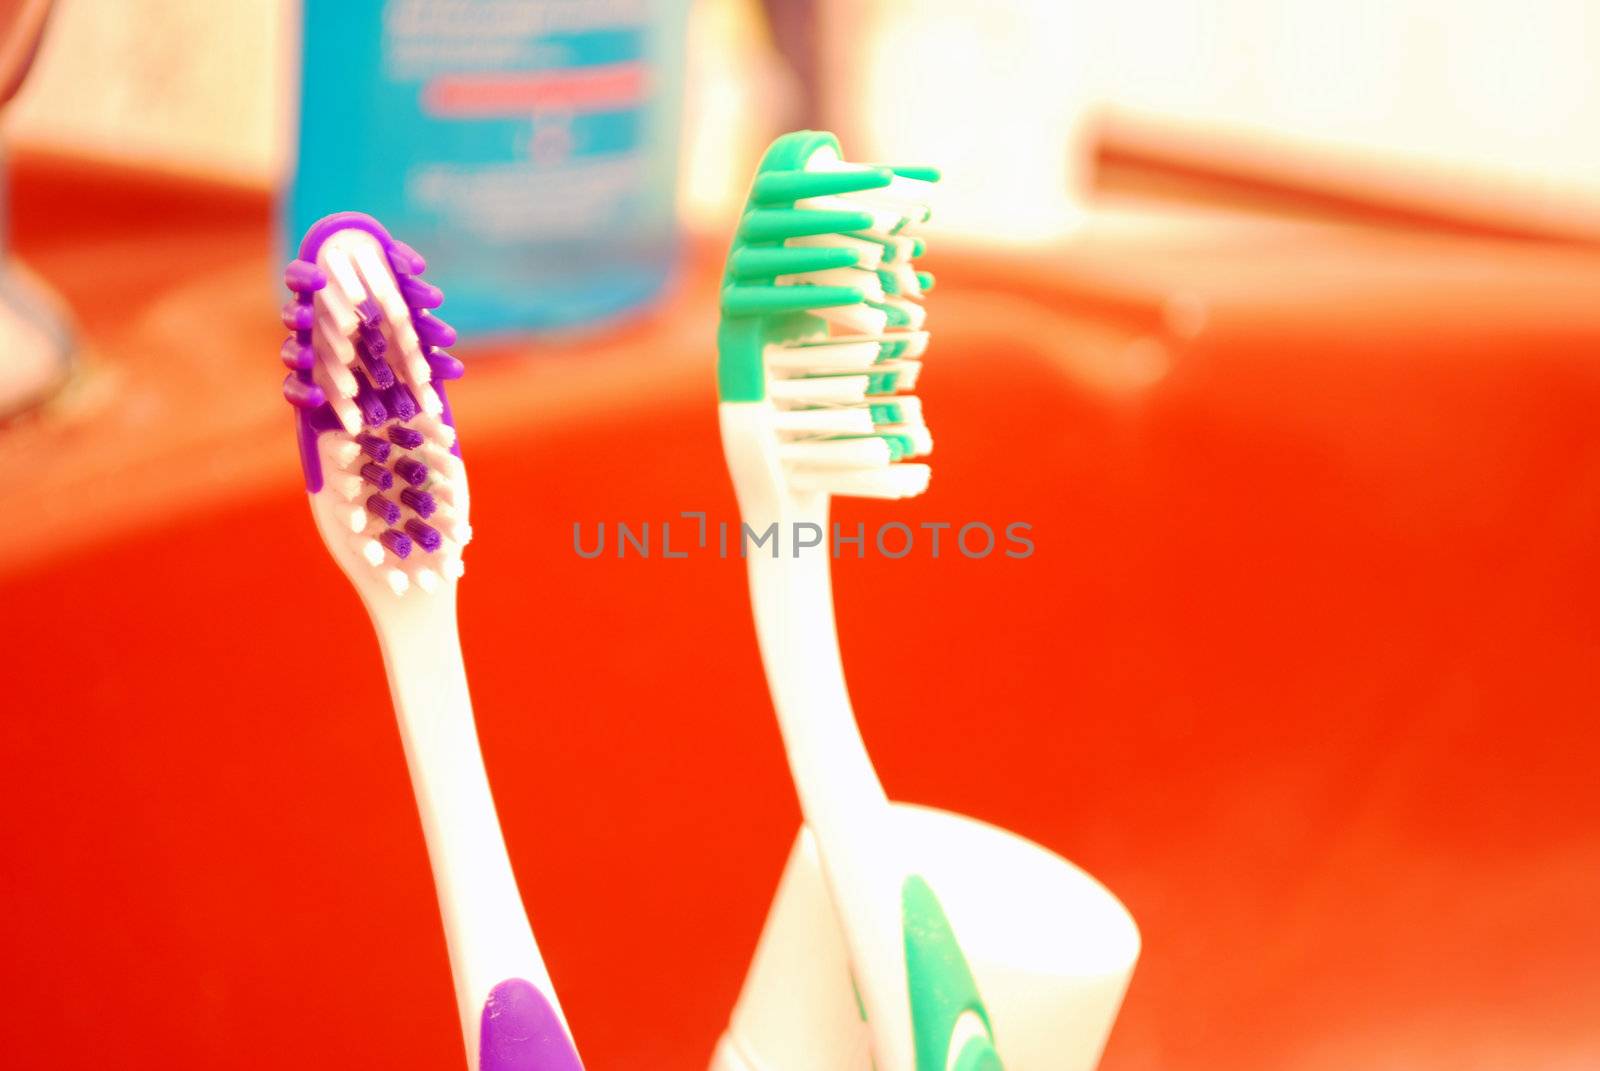 Tooth Brushes by tony4urban